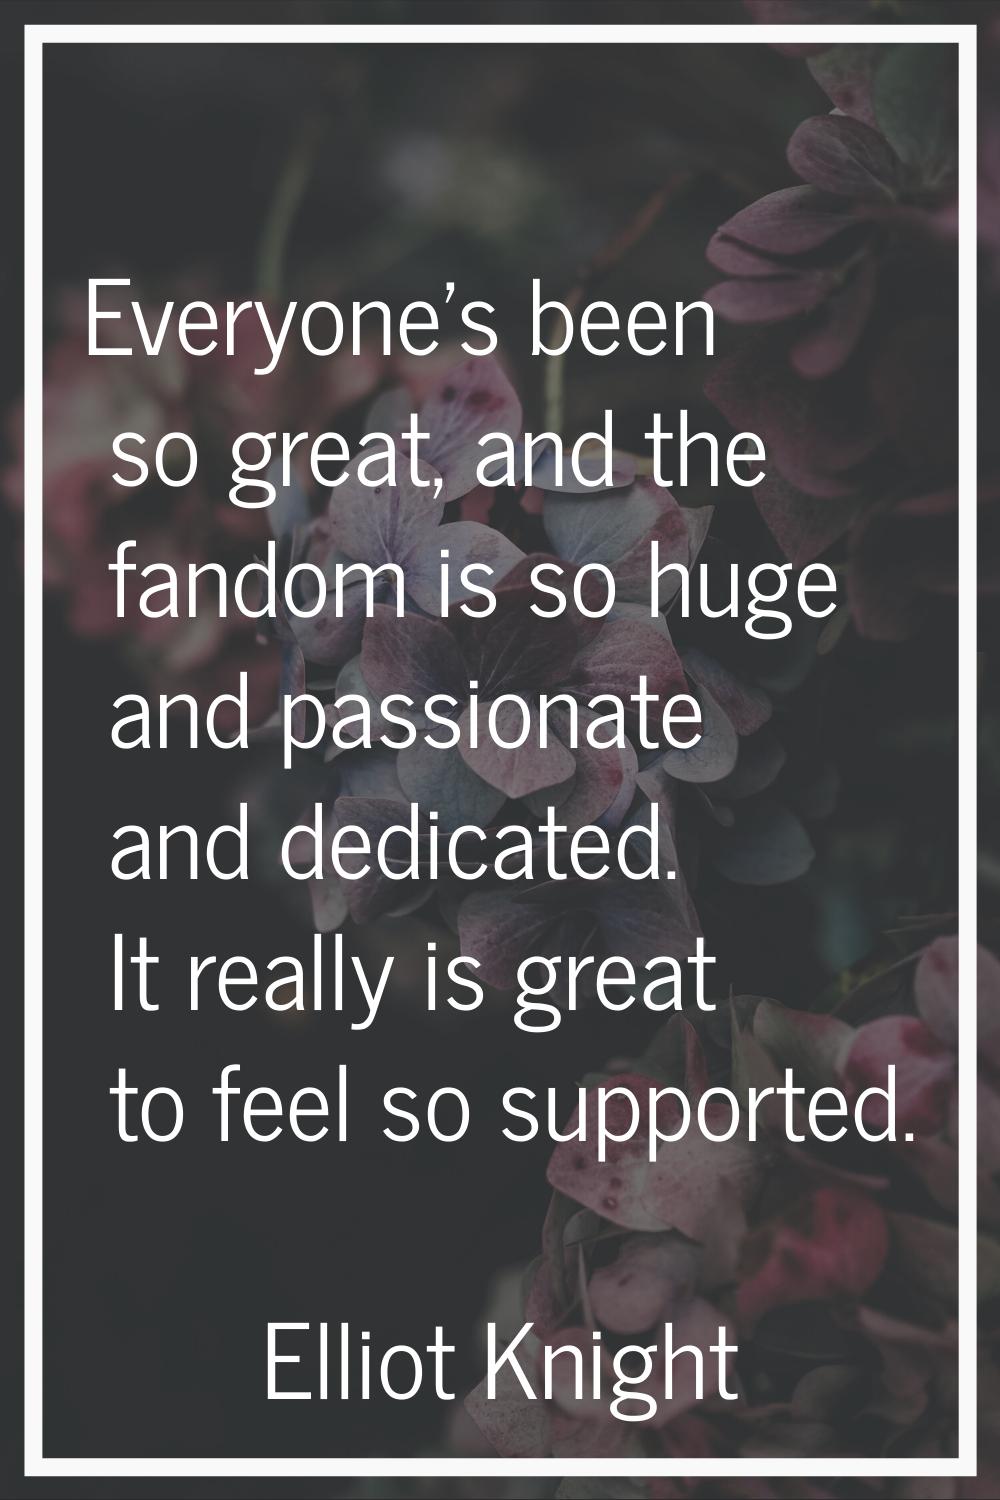 Everyone's been so great, and the fandom is so huge and passionate and dedicated. It really is grea